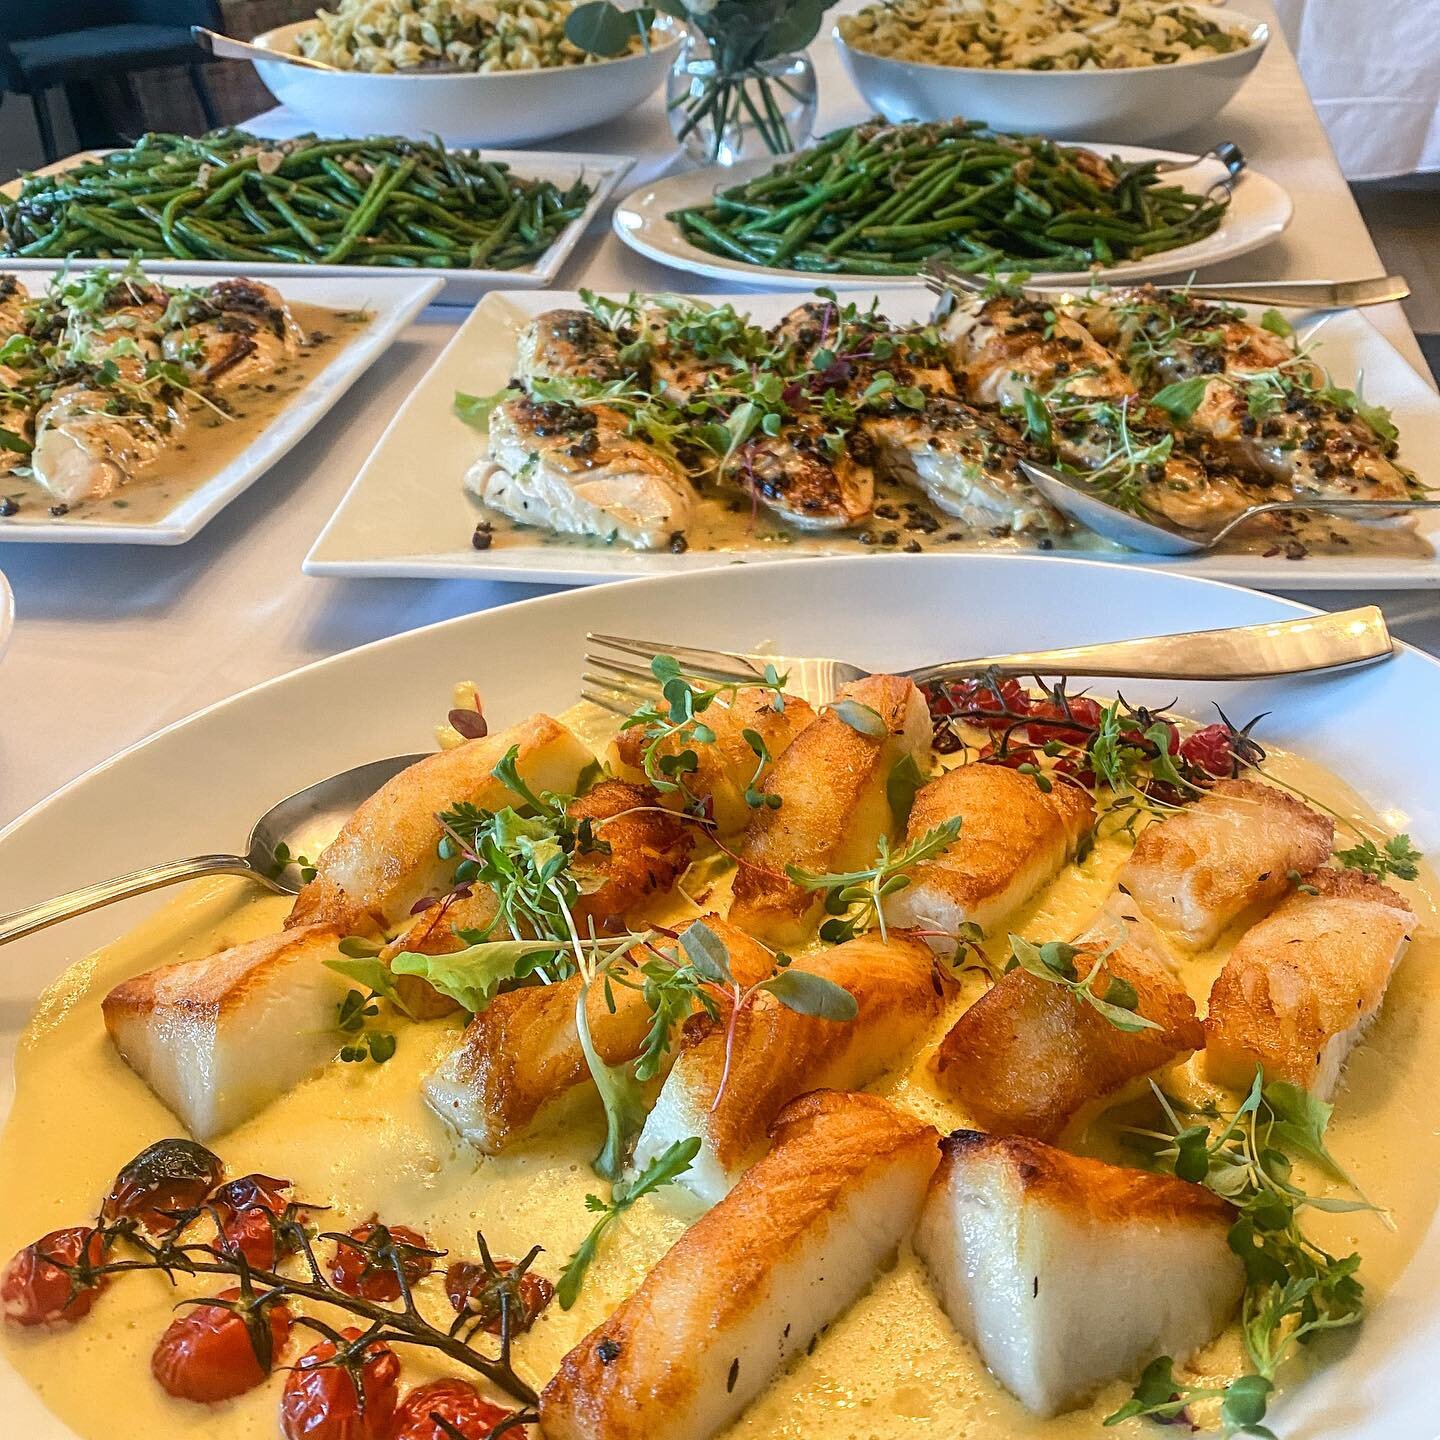 A wonderful #wedding buffet! 

#chefconsultant #cheflife #ctbites #chef #food #catering #personalchef #instafood #chefsofinstagram #foodstagram #foodporn #foodphotography #foodlover #cooking #caterer #mealprep #foodnetwork #delicious #privatedining #